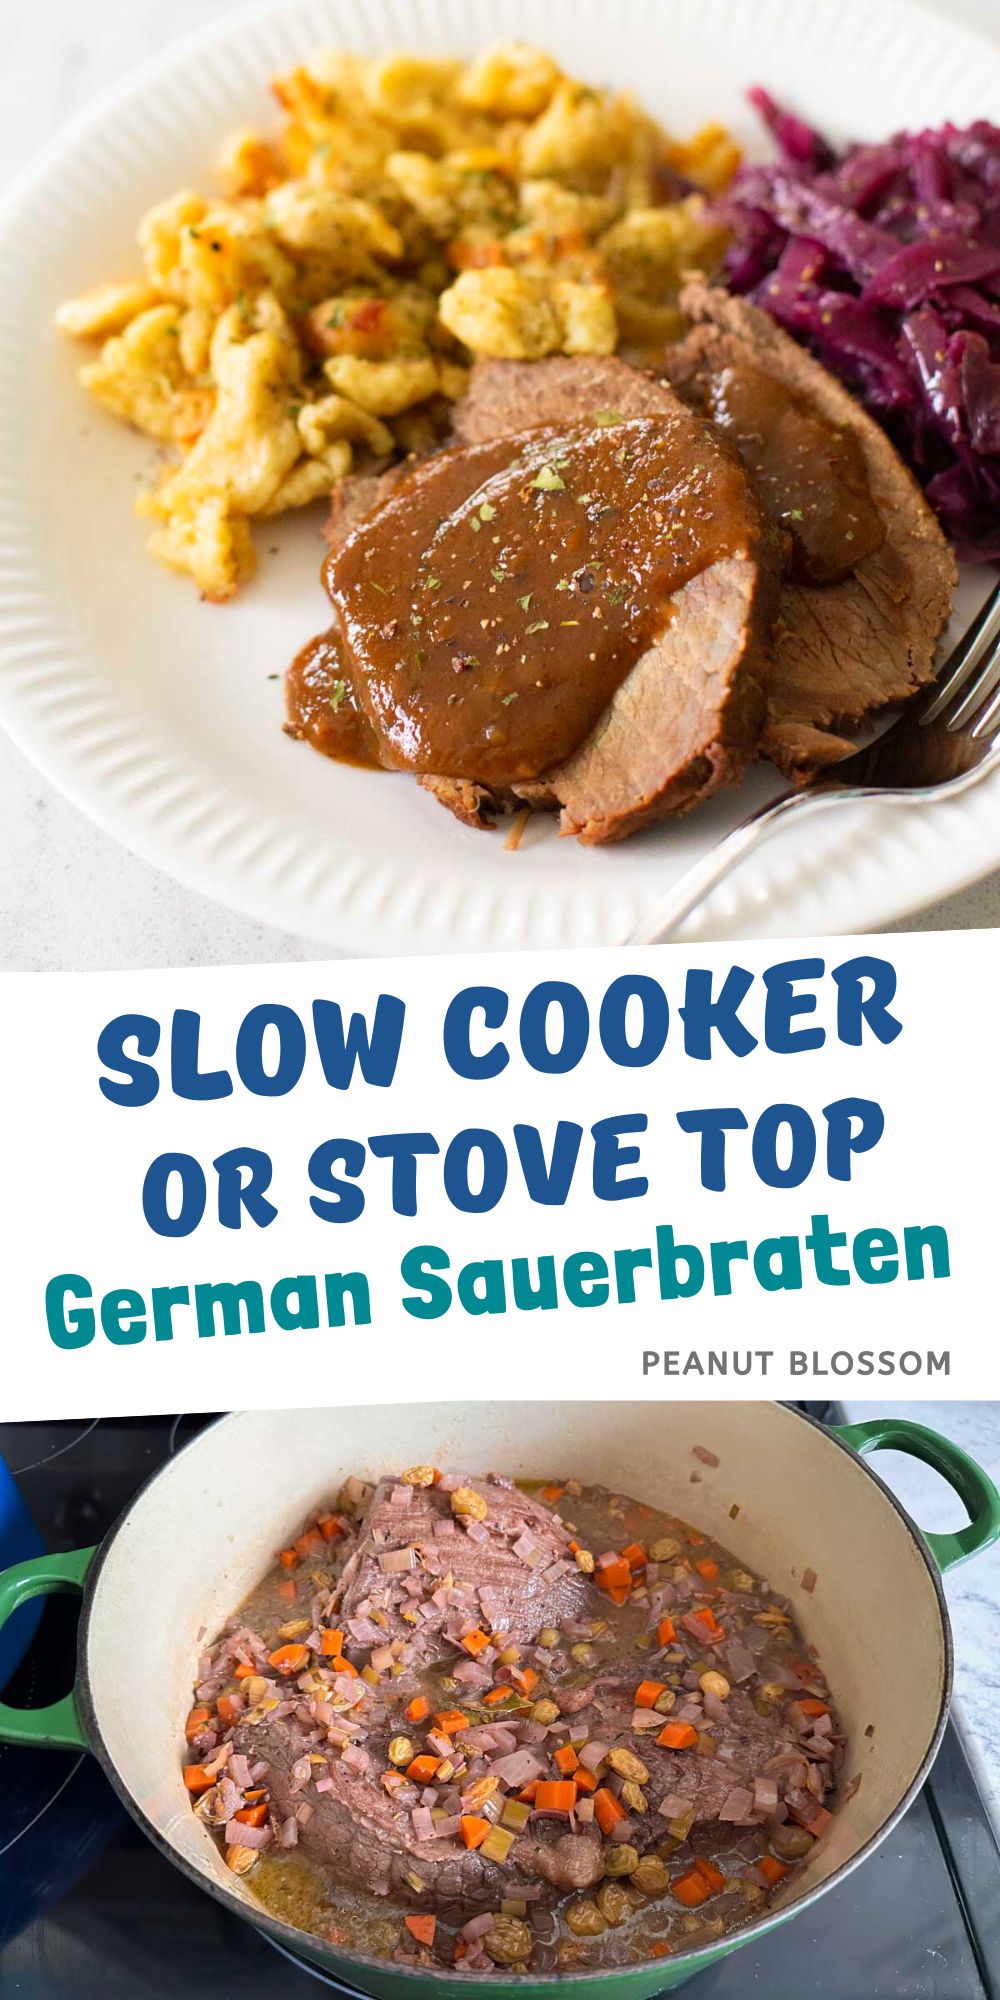 A photo collage shows a plate of cooked sauerbraten on top and a pot of sauerbraten below.